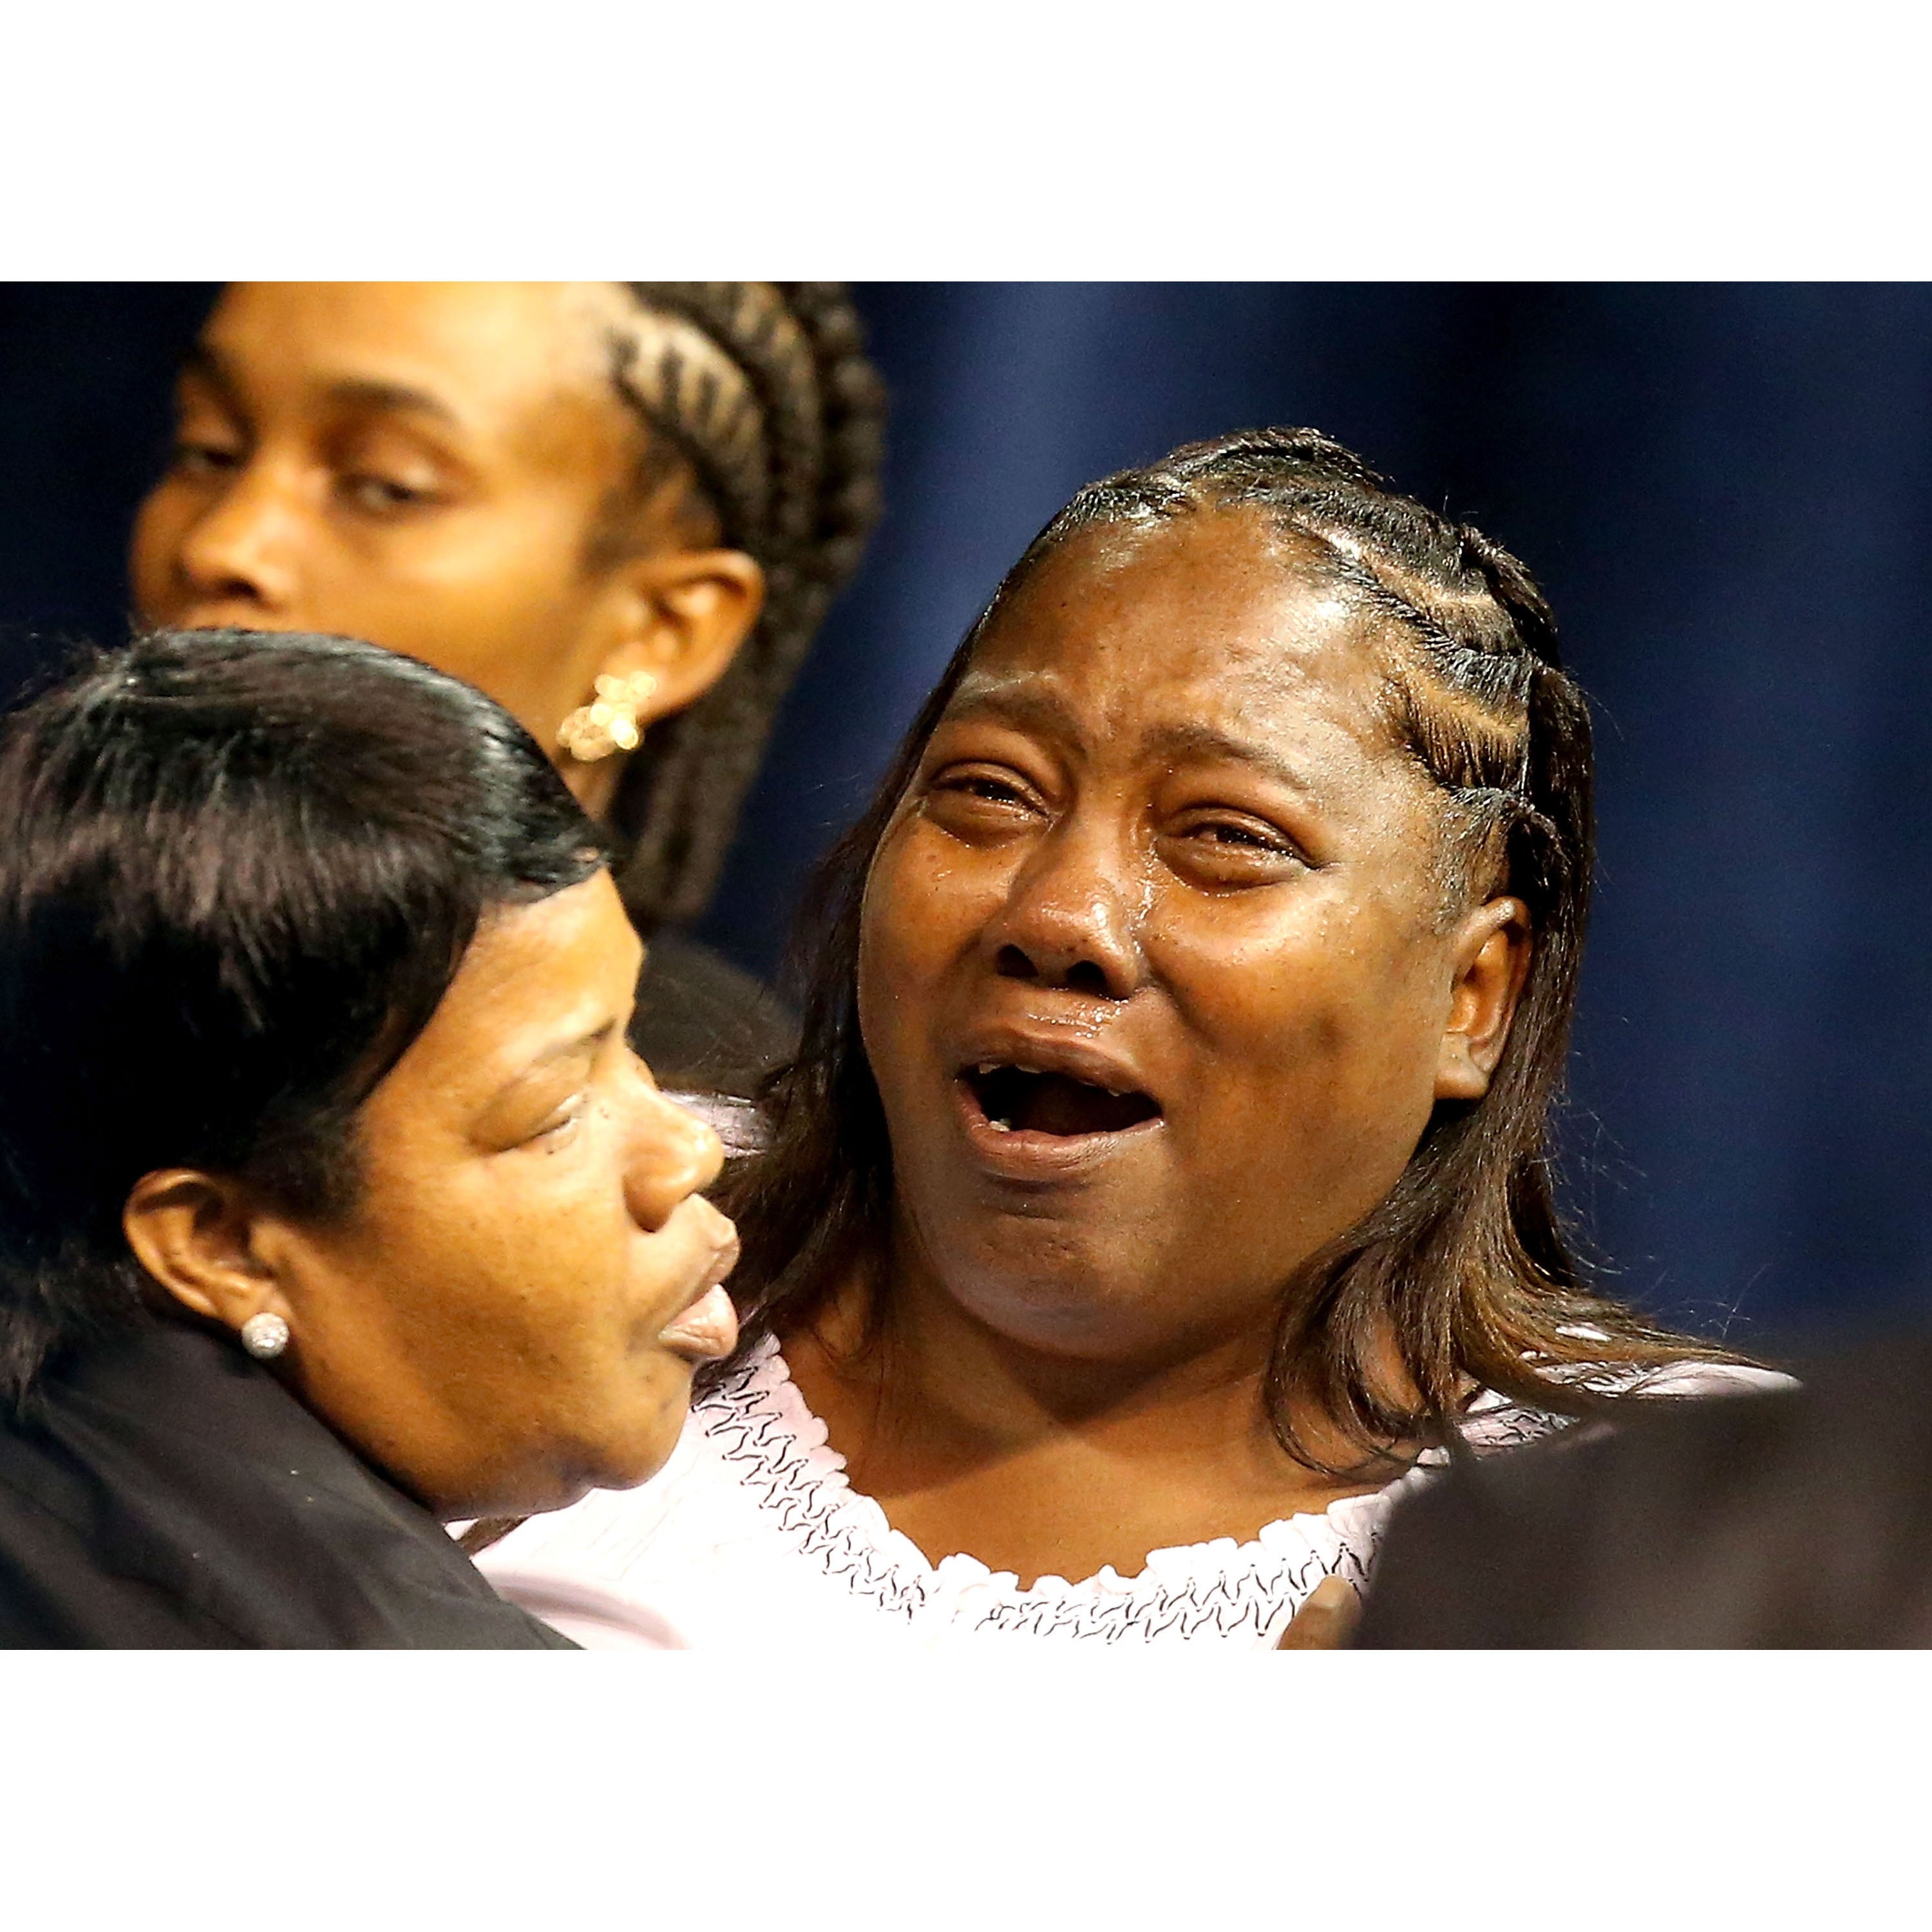 Family and Friends Gather To Lay Alton Sterling To Rest
